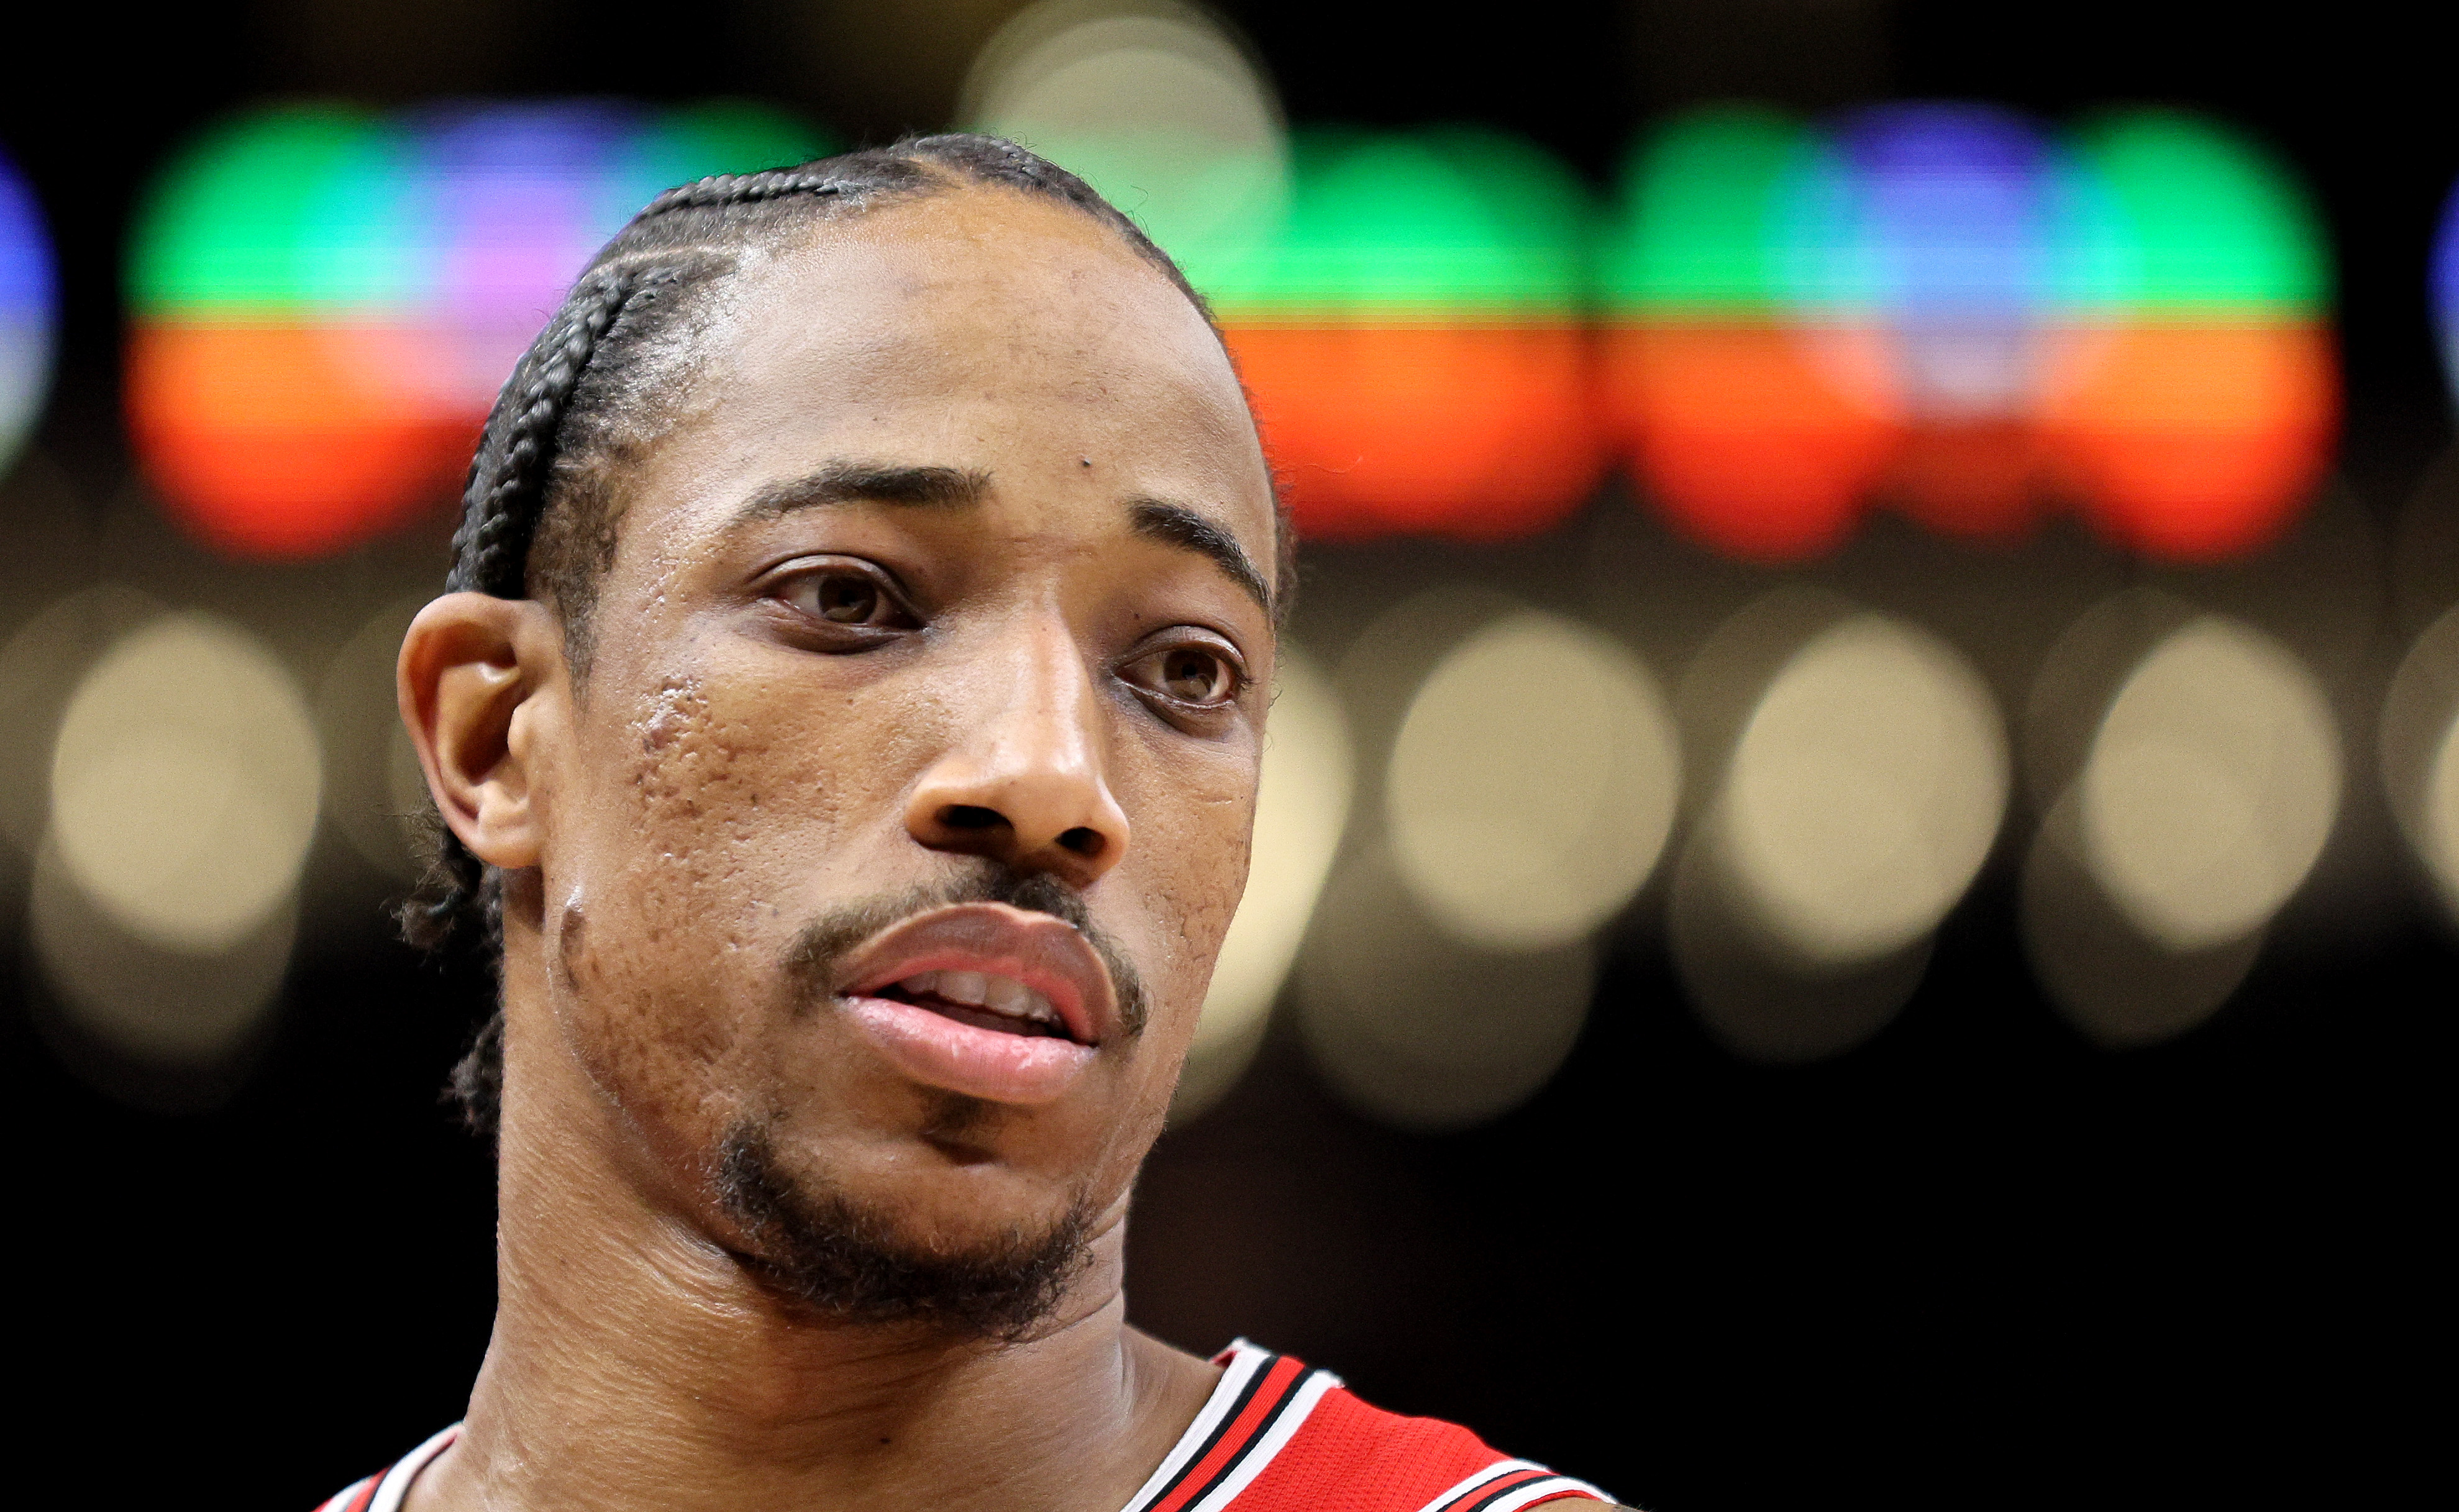 Chicago Bulls star DeMar DeRozan looks on during an NBA game against the Indiana Pacers in February 2022